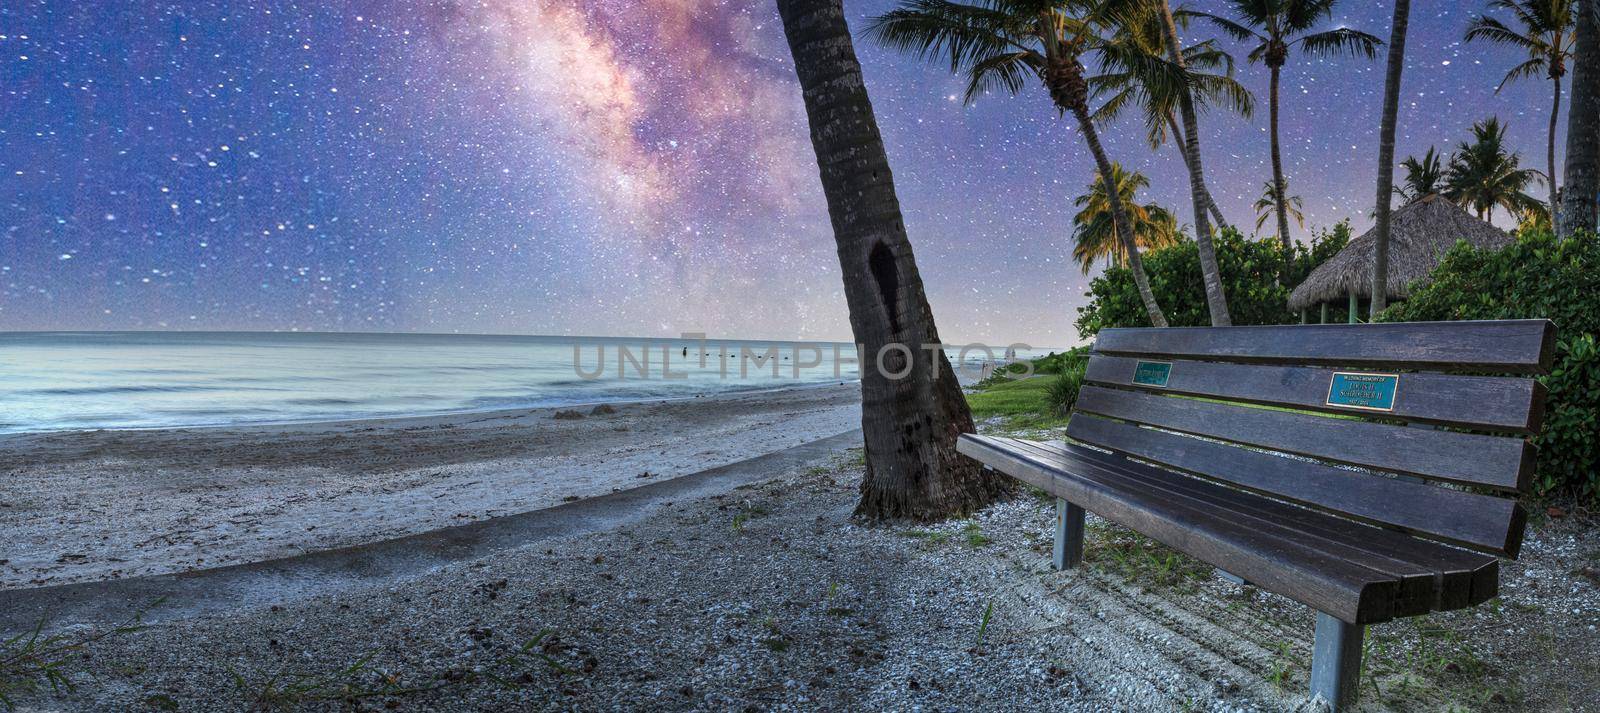 Milky way over Bench overlooking the ocean at Port Royal Beach  by steffstarr